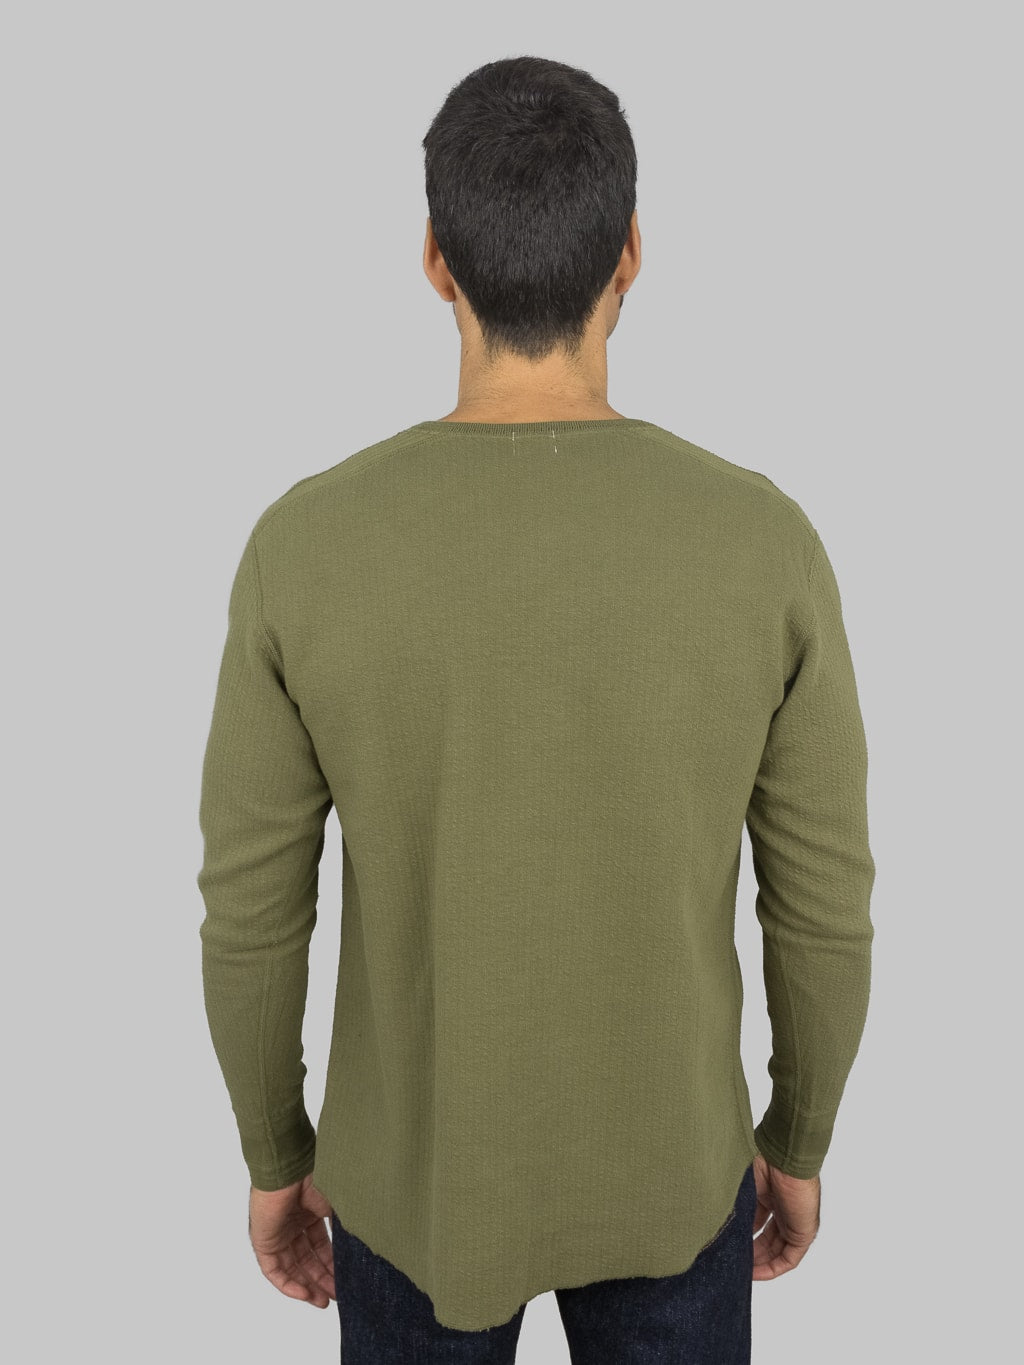 Loop Weft Double Face Jacquard henley Thermal army olive  back fit